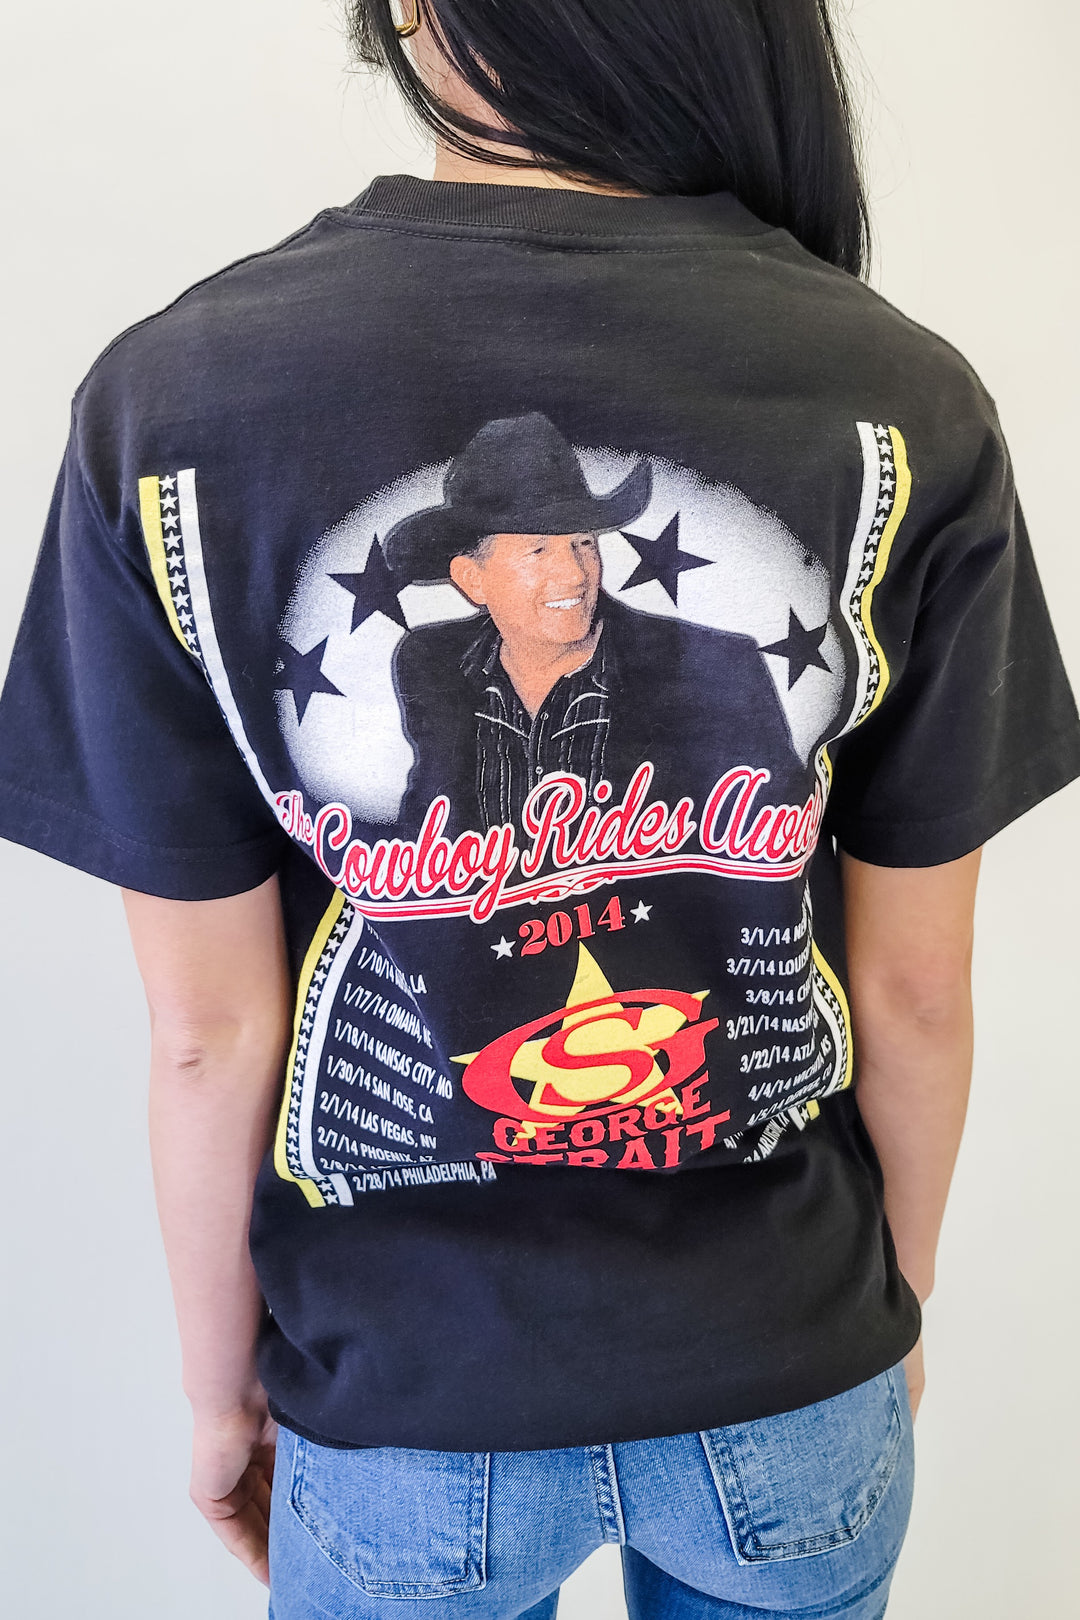 George Straight The Cowboy Rides Away Black Concert Tee